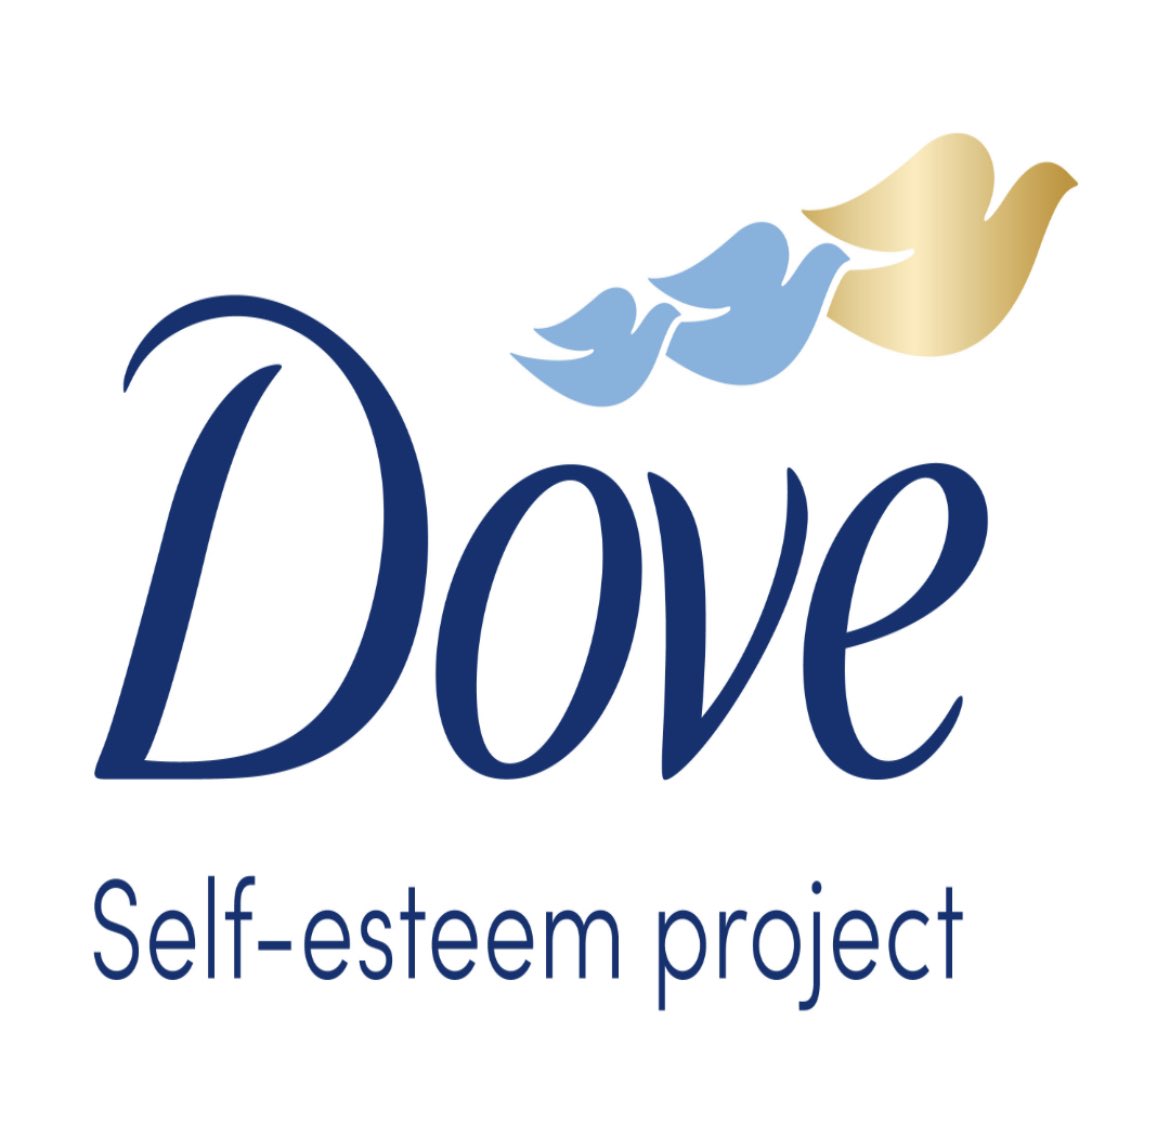 Year 7! 🙌🏼✨

I am honored & delighted to serve as a 7th year cadre trainer for the #DoveSelfEsteemProject! 

I am still committed to helping #educators to empower their students to love themselves by boosting their #confidence & #self-esteem! #DovePartner